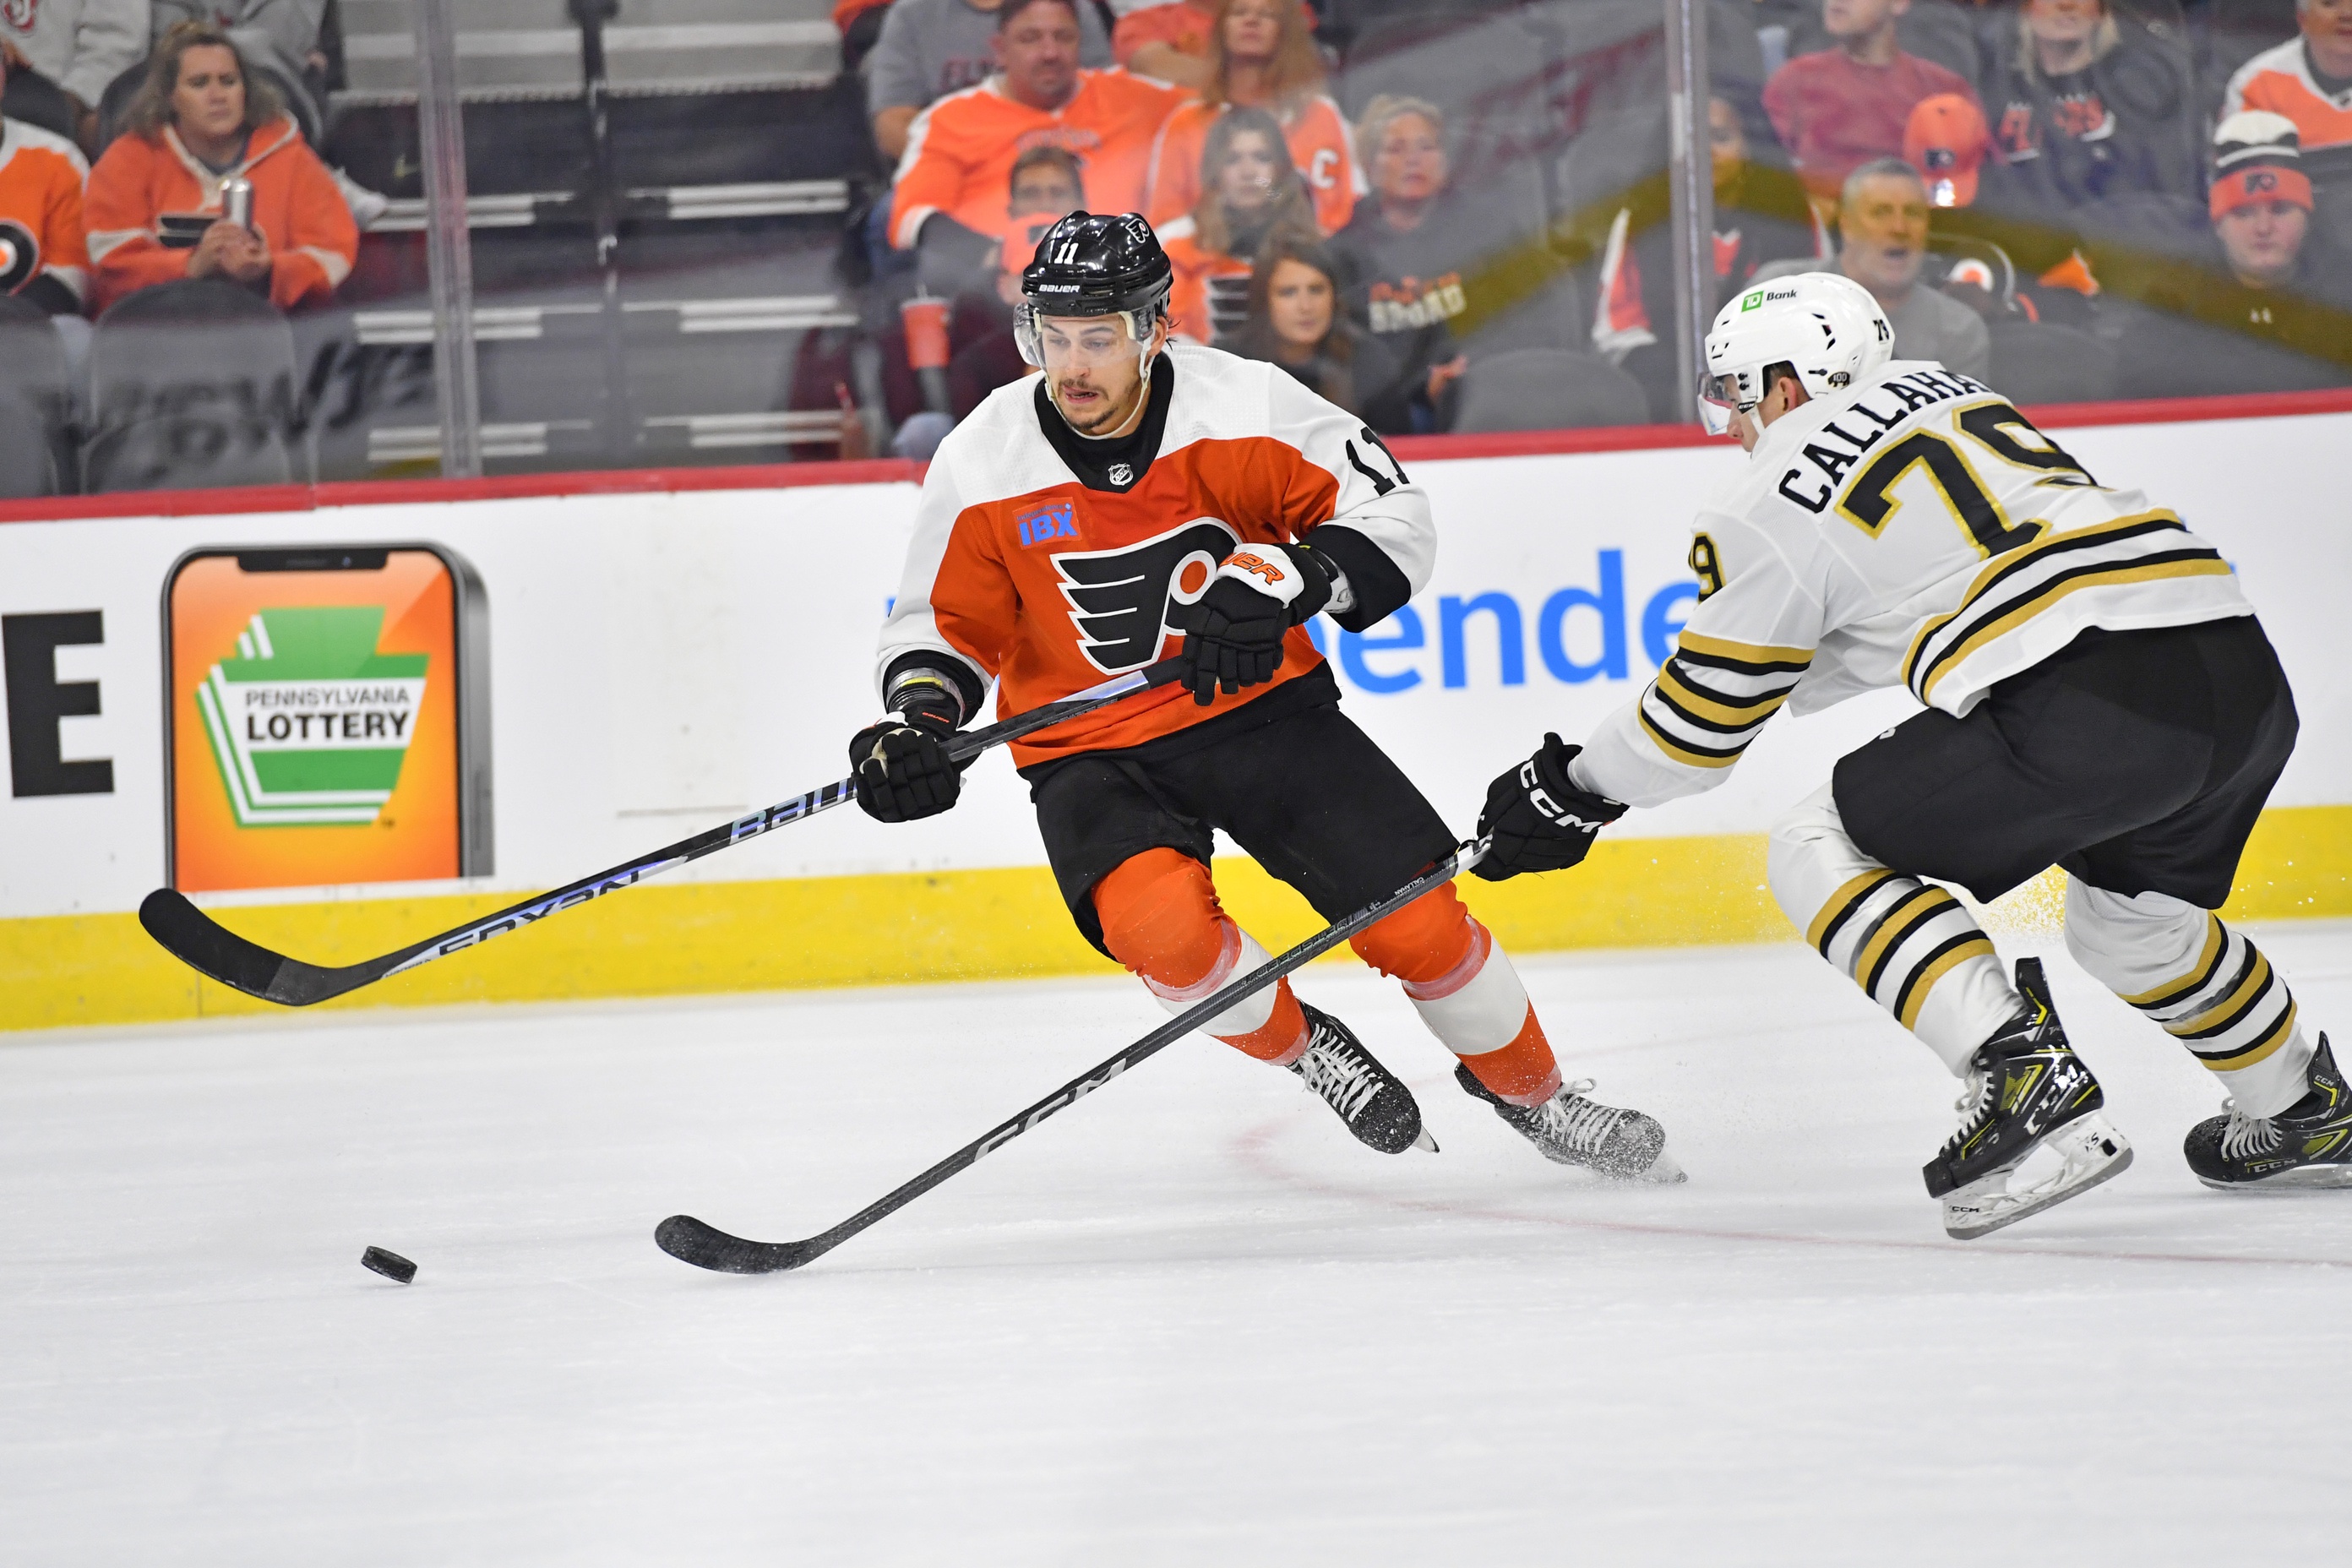 Grading The Flyers' Top 10 Draft Picks Through the Years